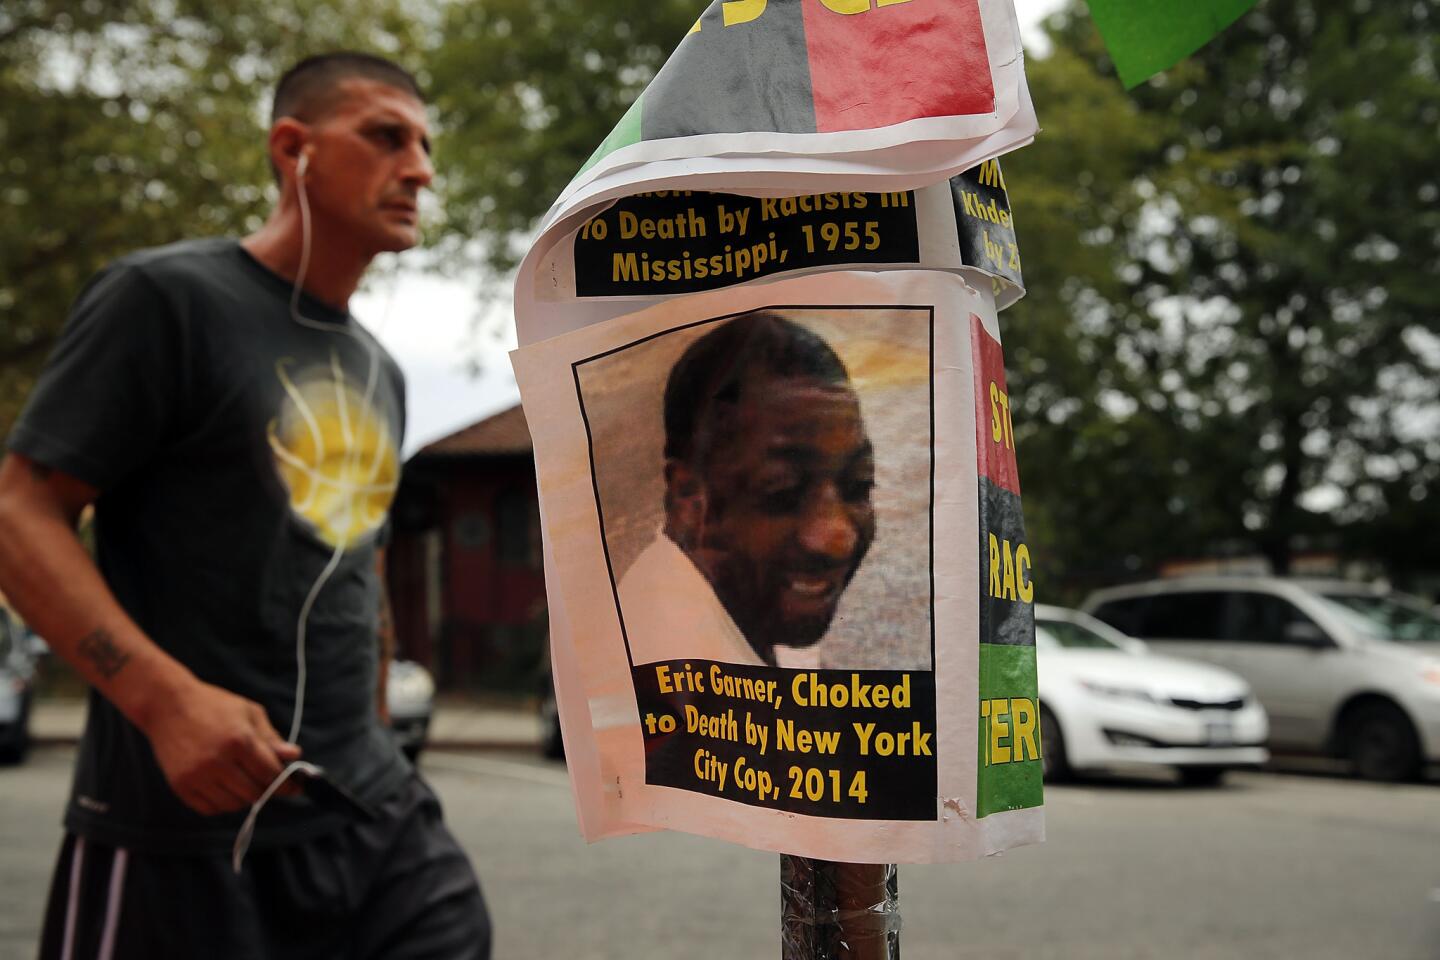 A flier with a picture of Eric Garner is seen Aug. 22, 2014, near where he was killed in an encounter with New York police officers in July in Staten Island.